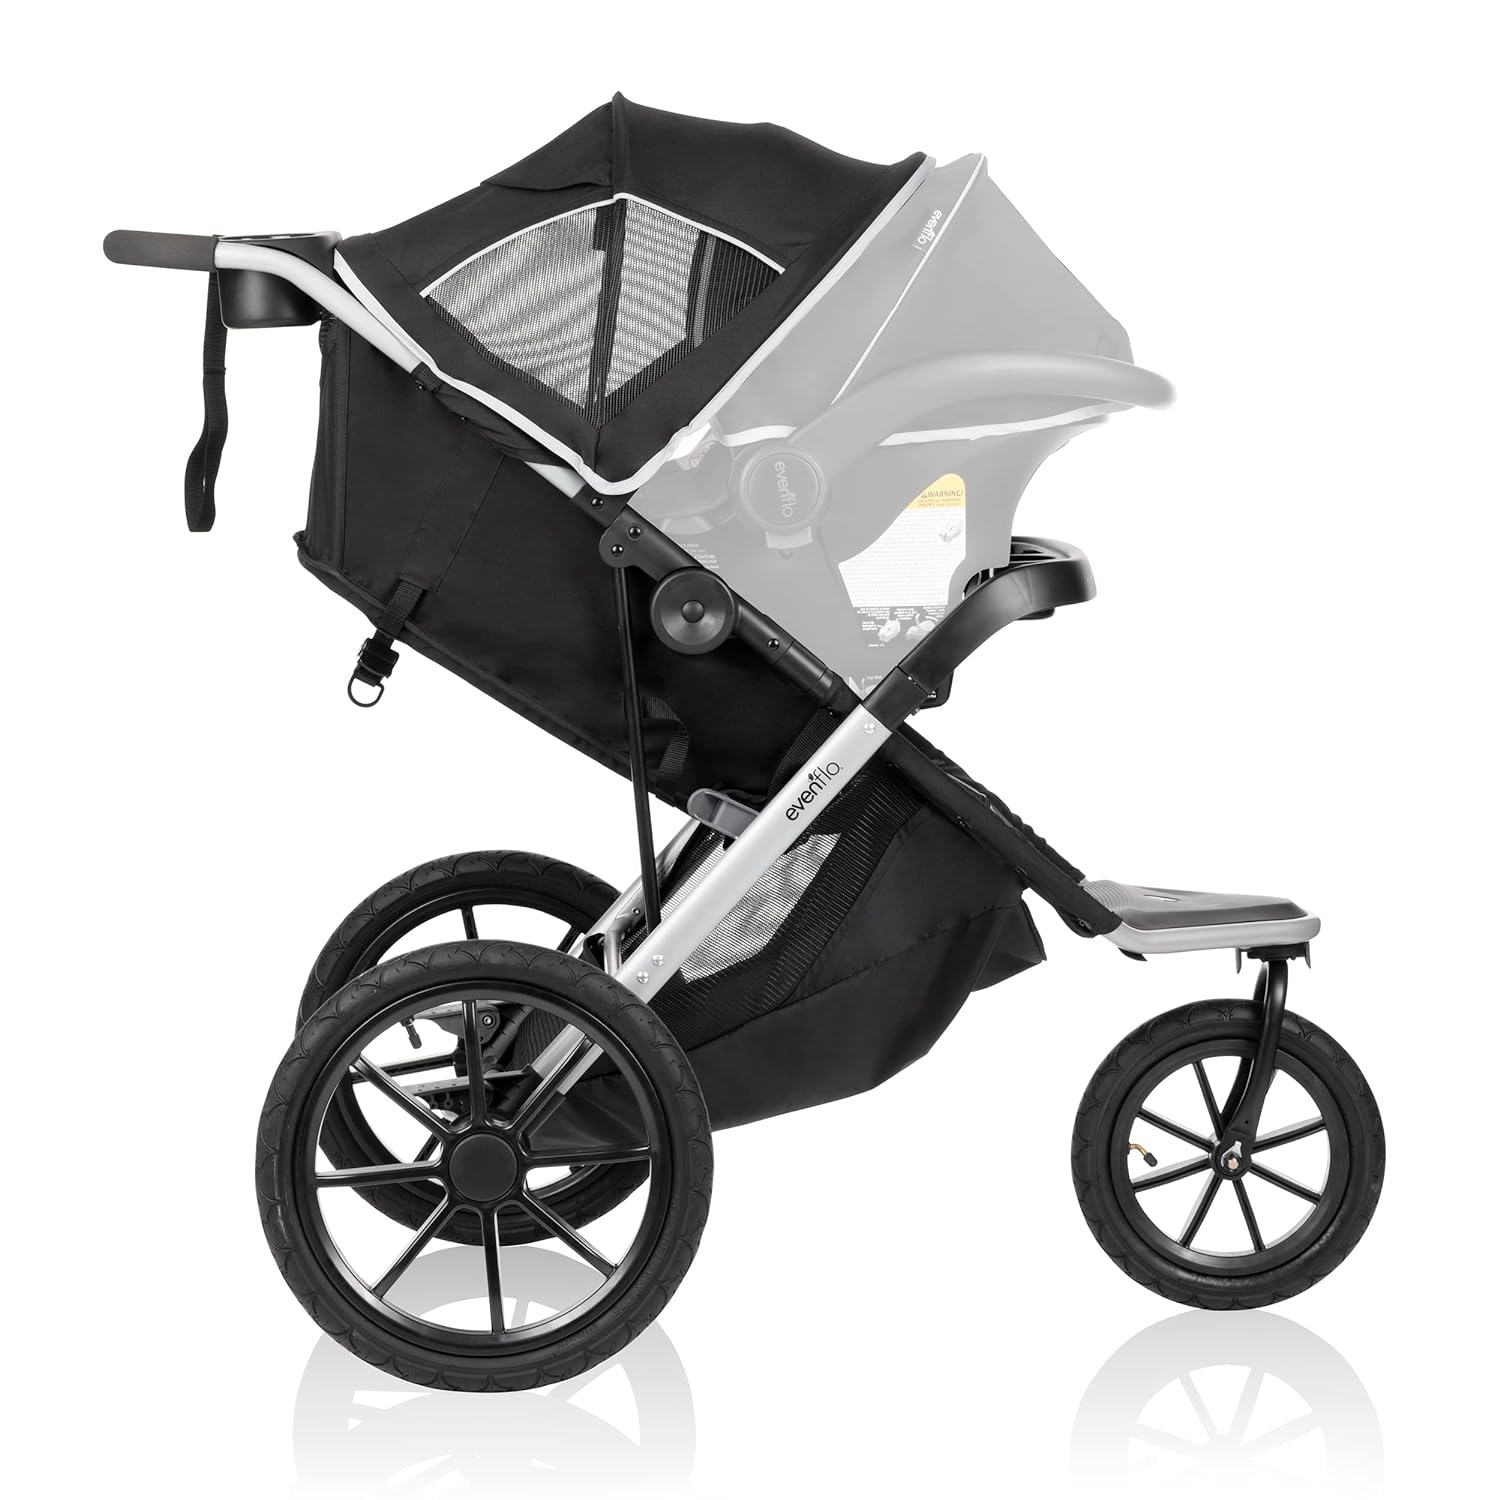 Evenflo Victory Plus Jogger Stroller, Compact, Lightweight, Self-Standing, Ample Storage, Large Tires, Swivel Wheel, Full Coverage Canopy, Multi-Reclining Seat, Compatible With LiteMax Infant Car Seat - image 4 of 11